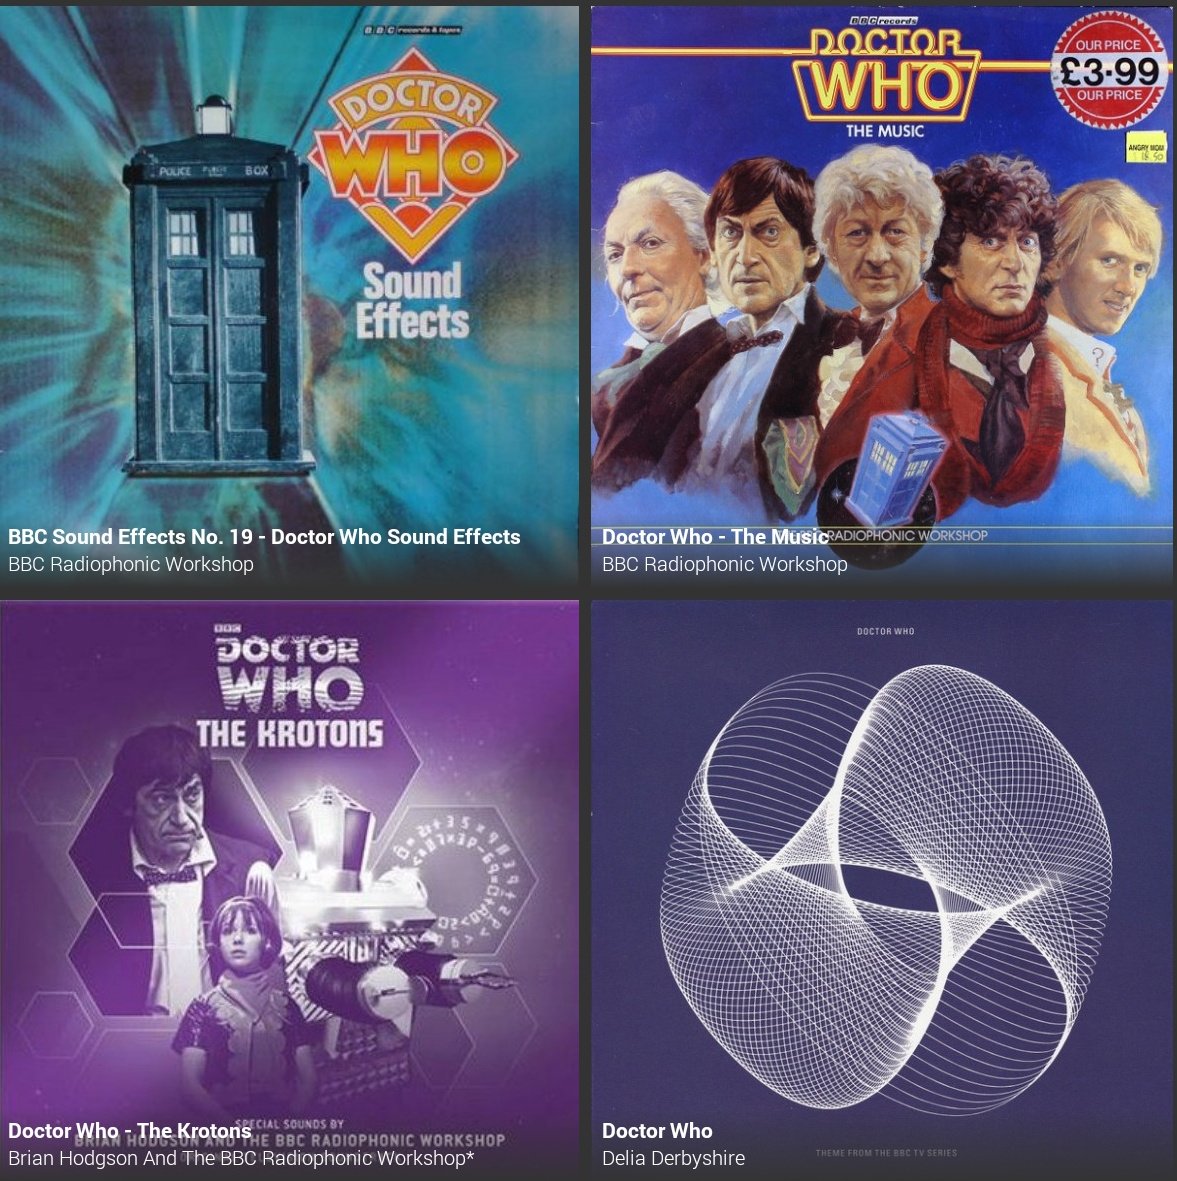 Here is a mini-thread of all my Dr Who vinyl records,
If I can find pictures of them all...

#DrWho #DrWho60YearsToday #drwho60 #daleks #records #vinyl #vinylrecords #scifi #doctorwho #cybermen #radiophonic #radiophonicworkshop #bbc #bbcrecords #soundtrack #ost #soundeffects